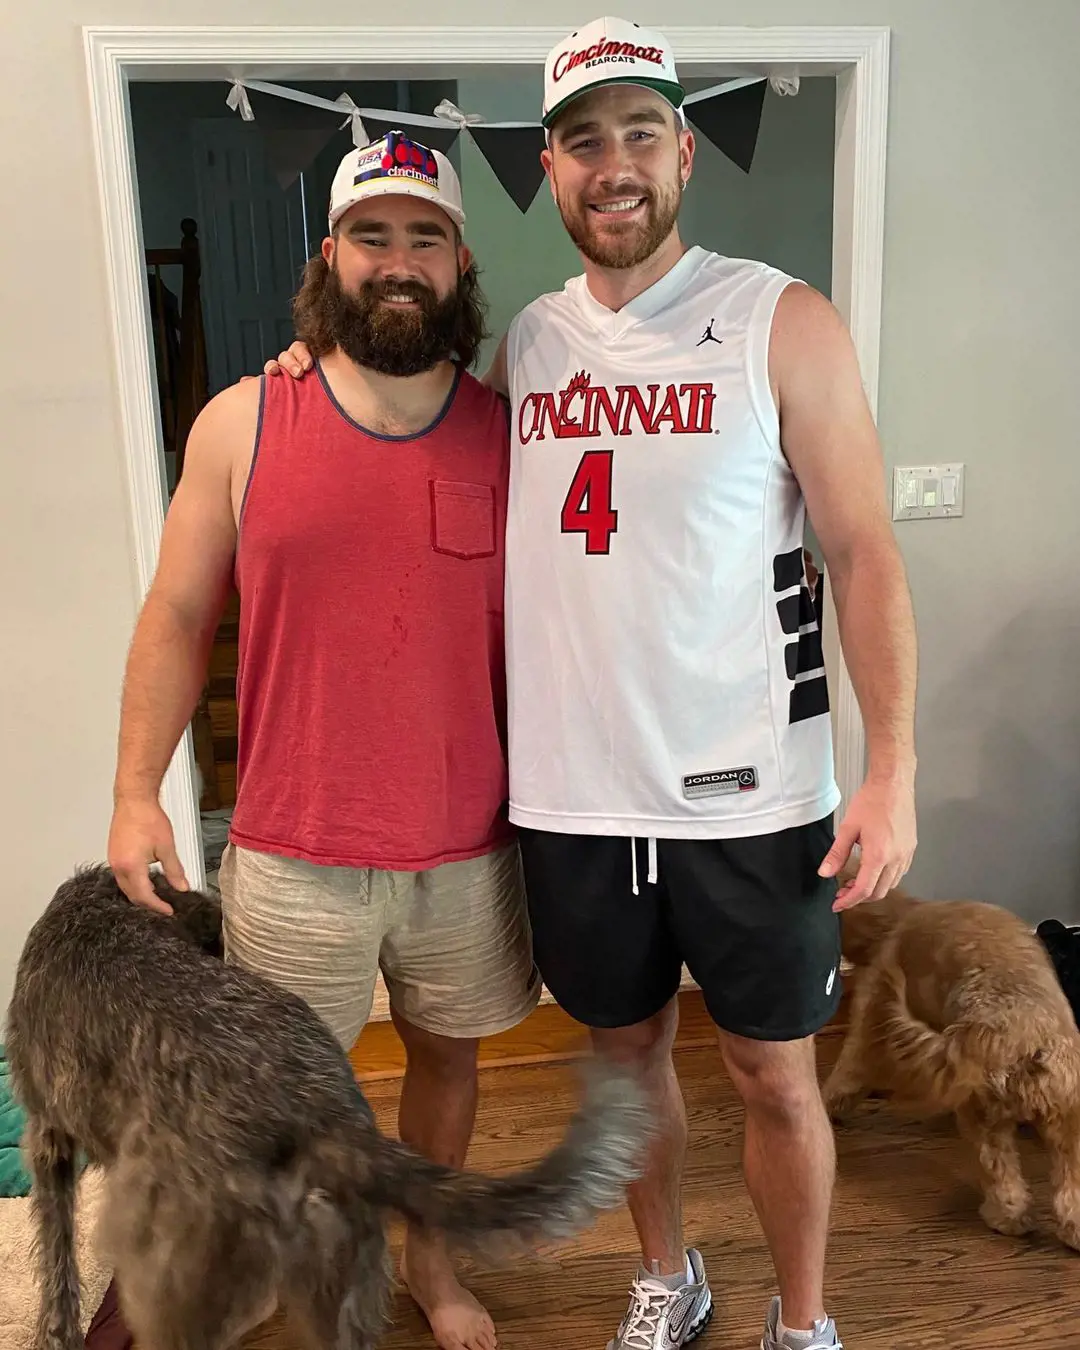 Travis and Jason playing with their dogs at their childhood home in May 2020